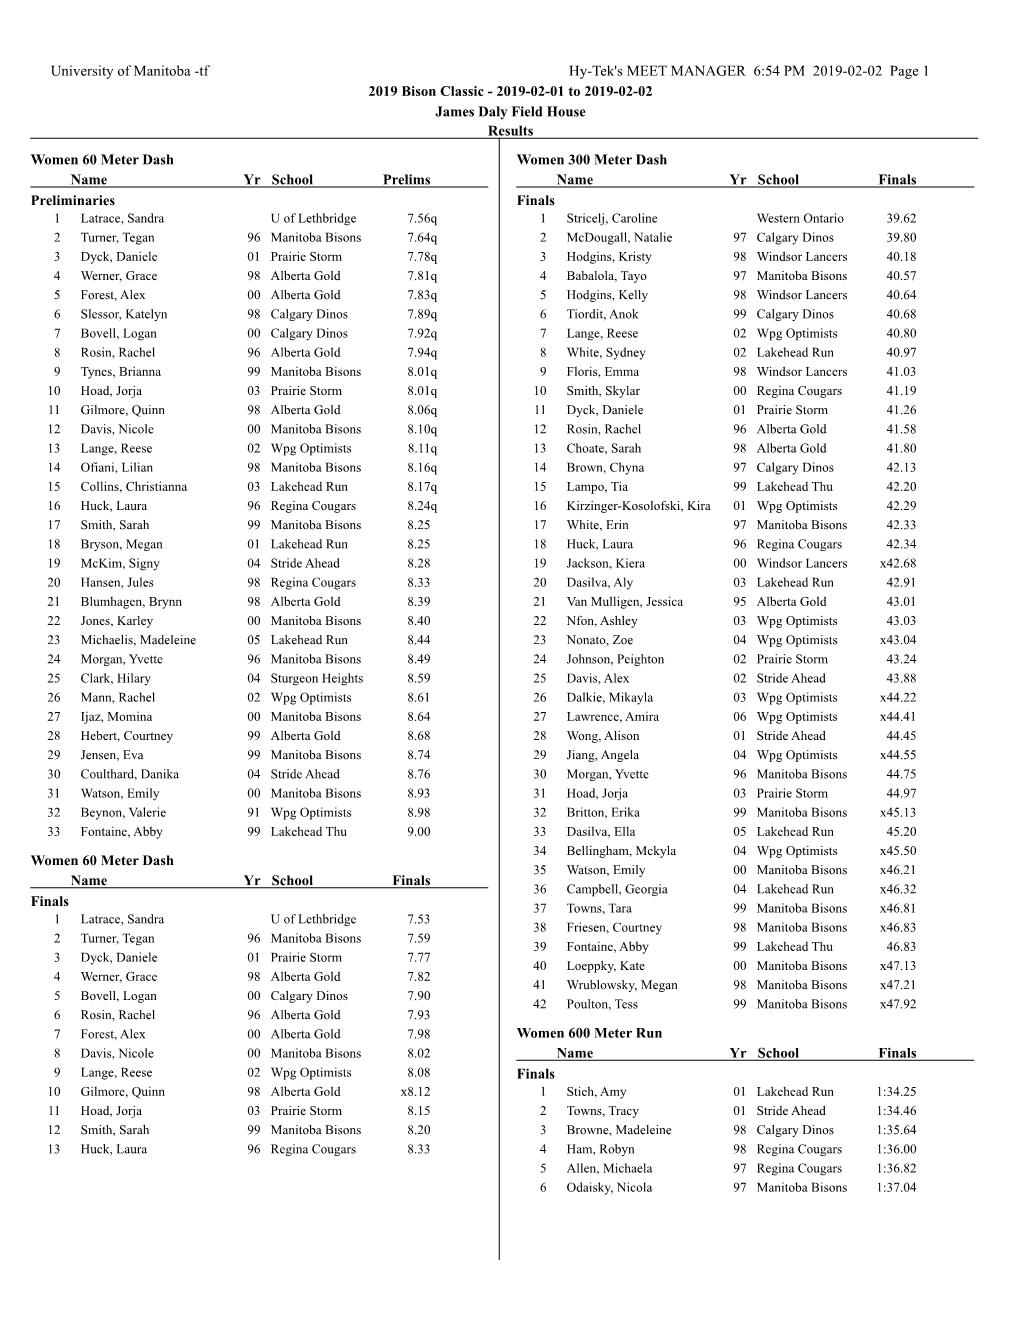 University of Manitoba -Tf Hy-Tek's MEET MANAGER 6:54 PM 2019-02-02 Page 1 2019 Bison Classic - 2019-02-01 to 2019-02-02 James Daly Field House Results